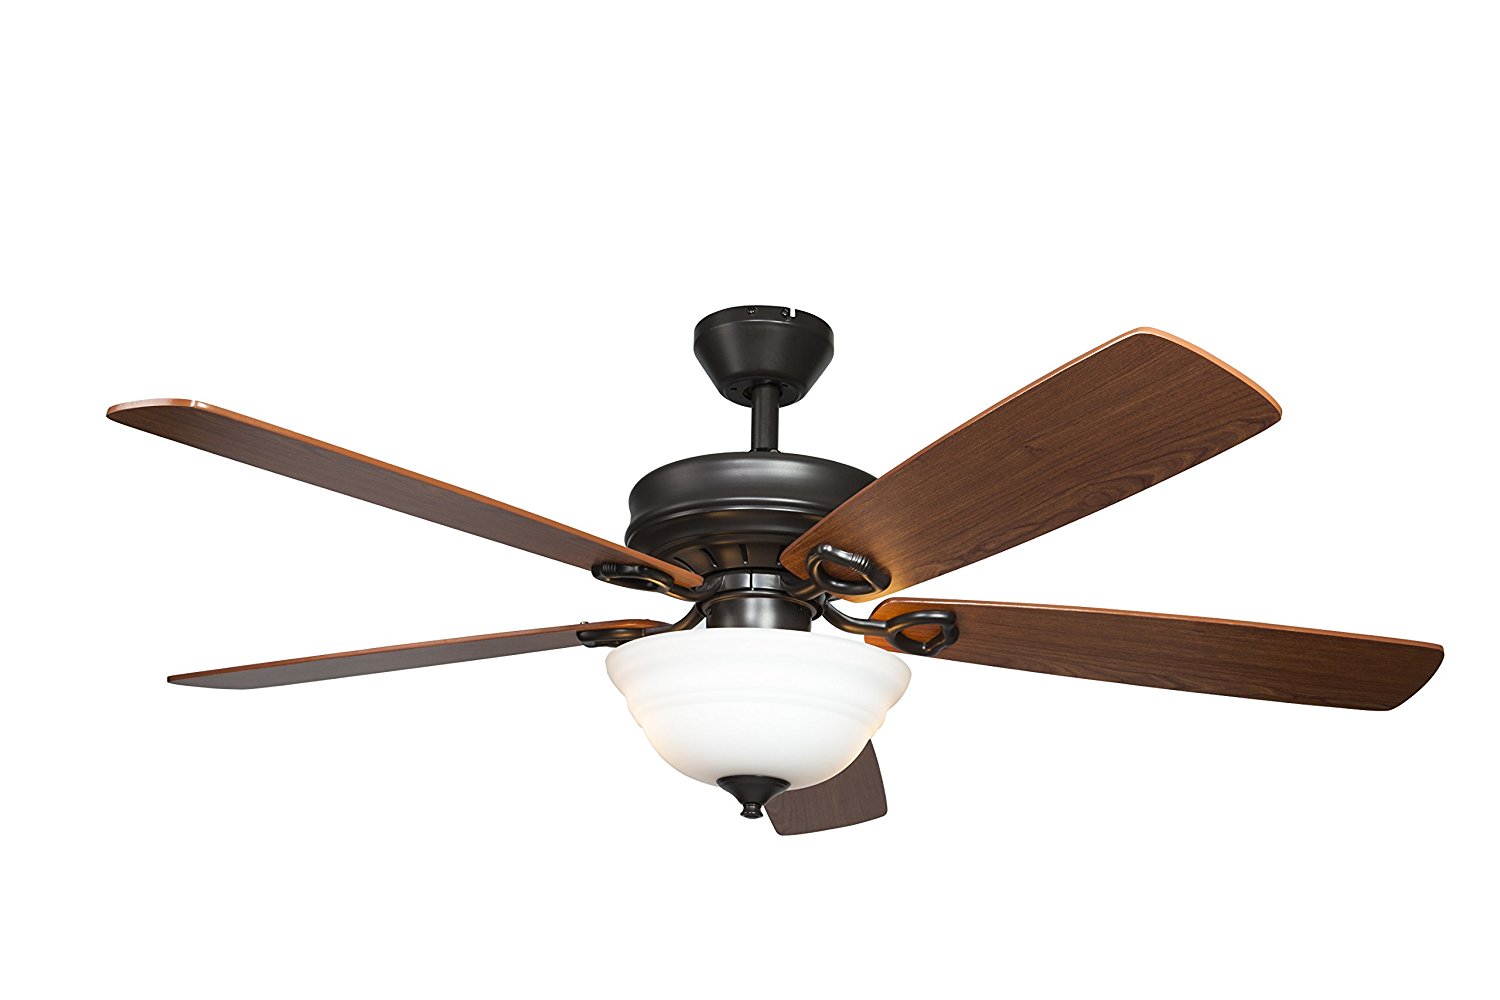 Hyperikon Indoor Ceiling Fan with Remote Control - 52-inch Wood Ceiling Fan, Energy Star - Black Fixture with Five Brown Blades and Frosted Dome Light - Bulb Not Included